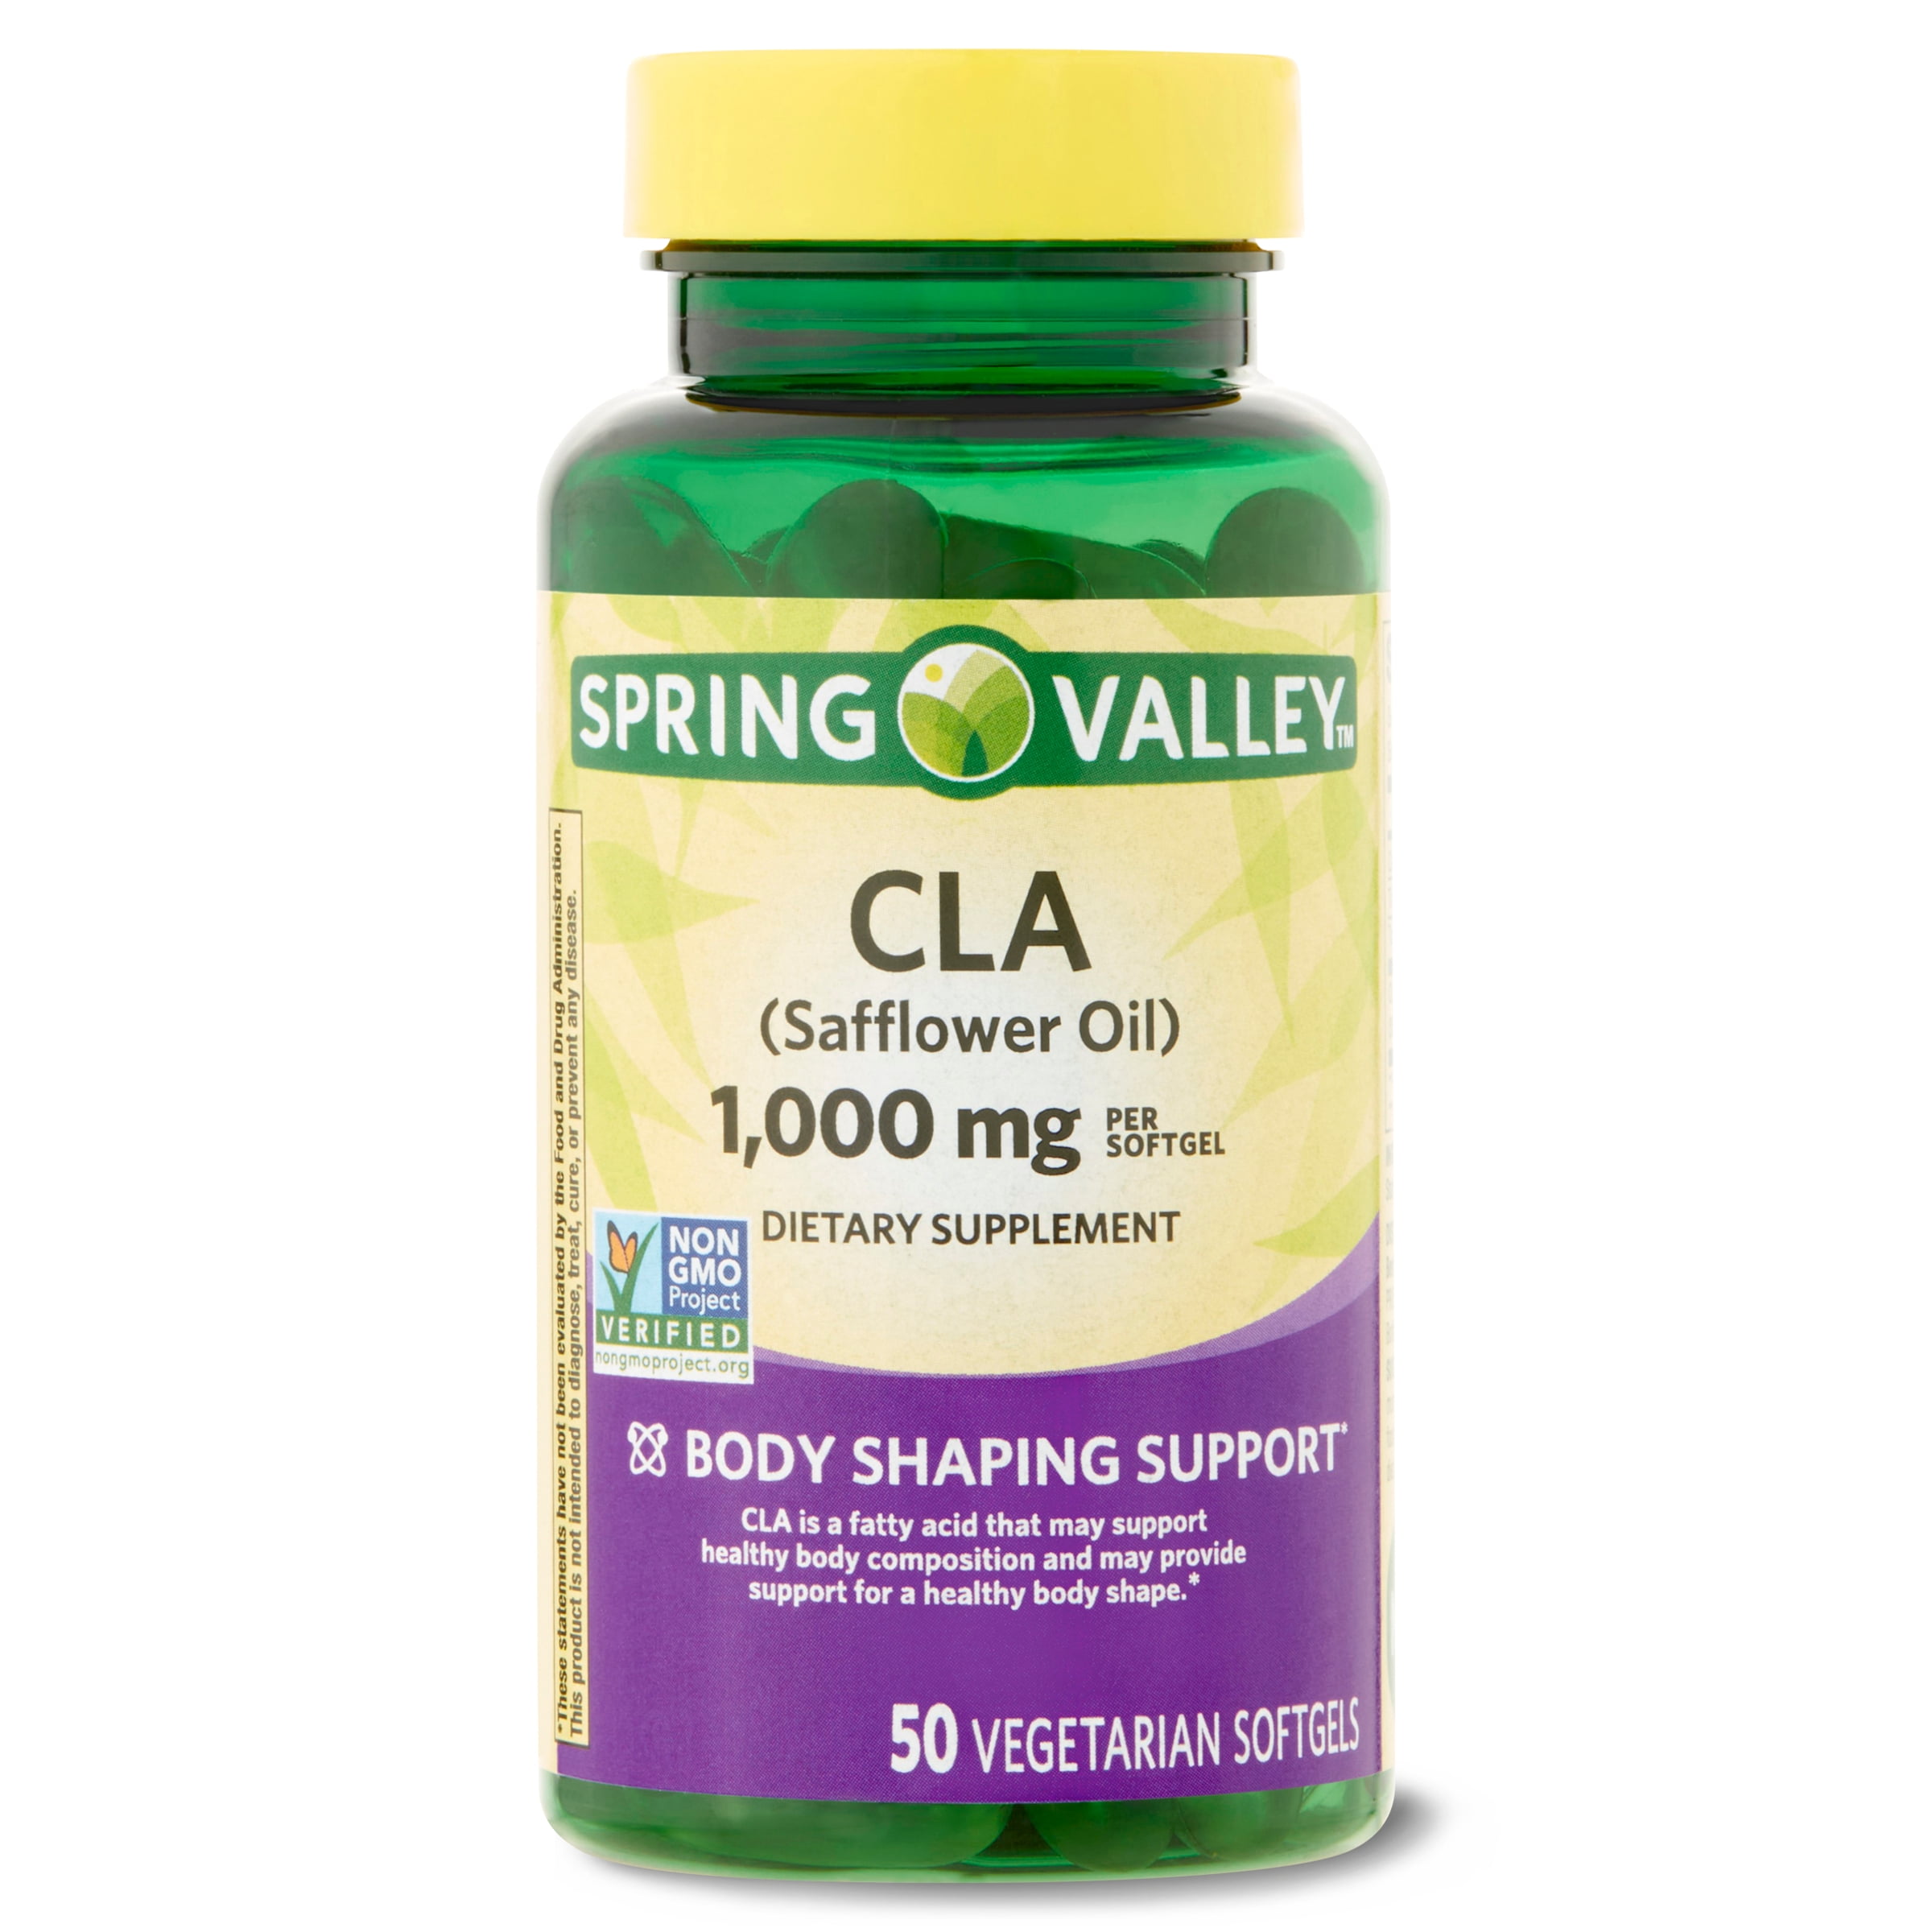 Spring Valley CLA Safflower Oil Dietary Supplement, 1,000 mg, 50 count